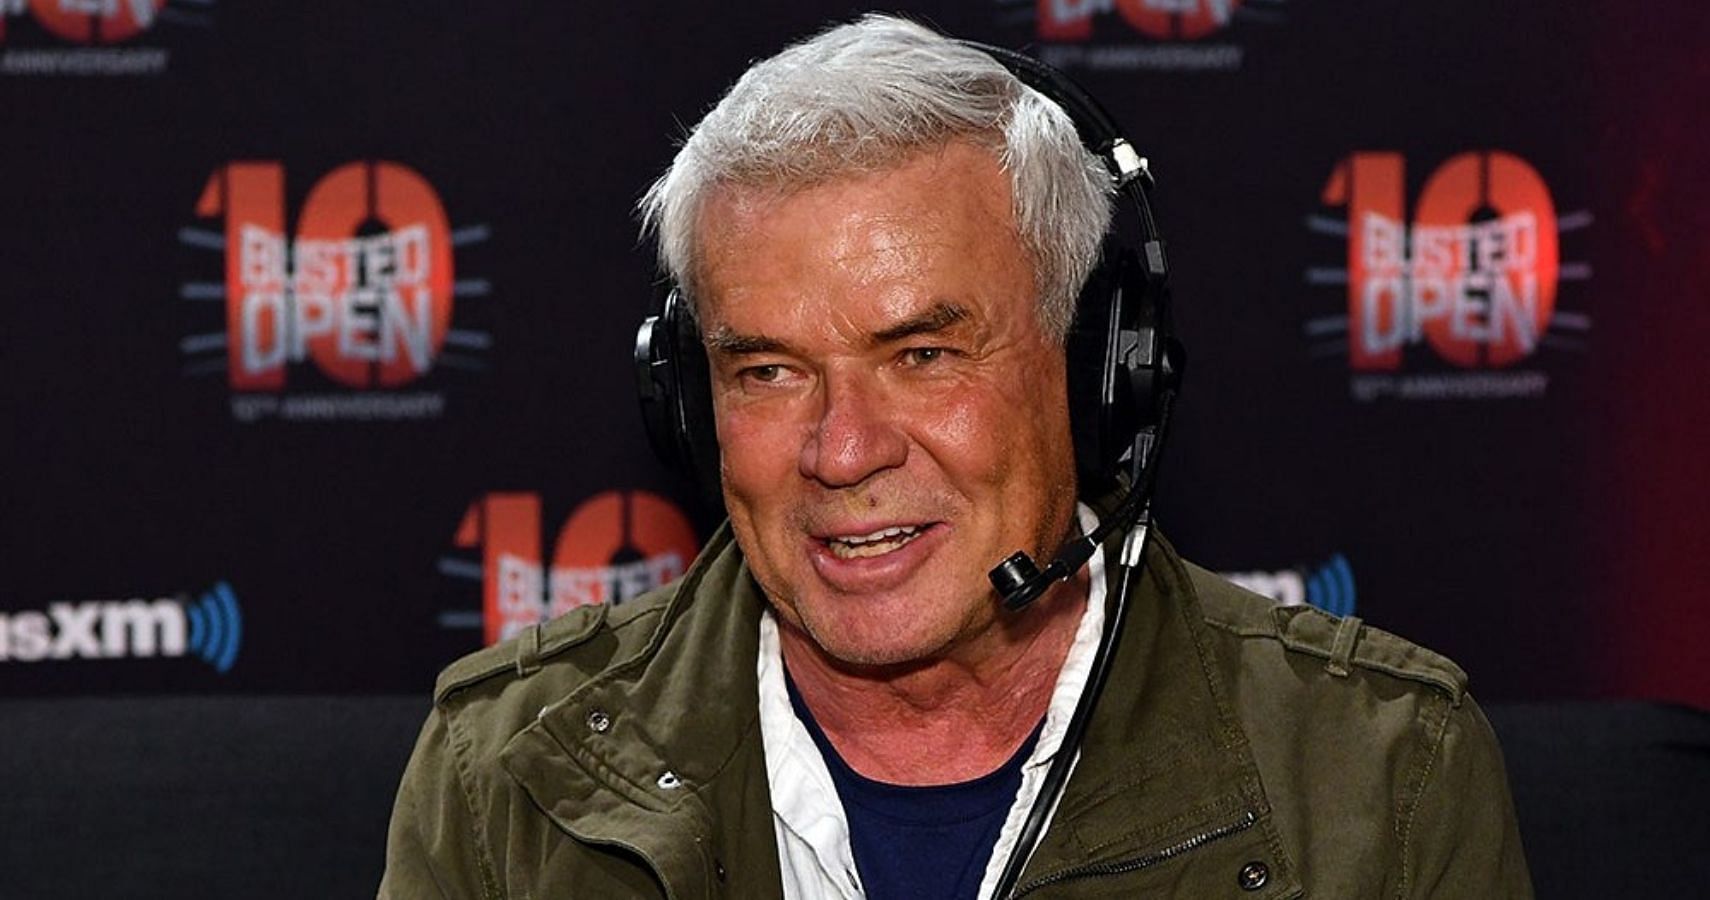 Eric Bischoff has some comments for the infamous Will Smith/Chris Rock moment at the Oscars